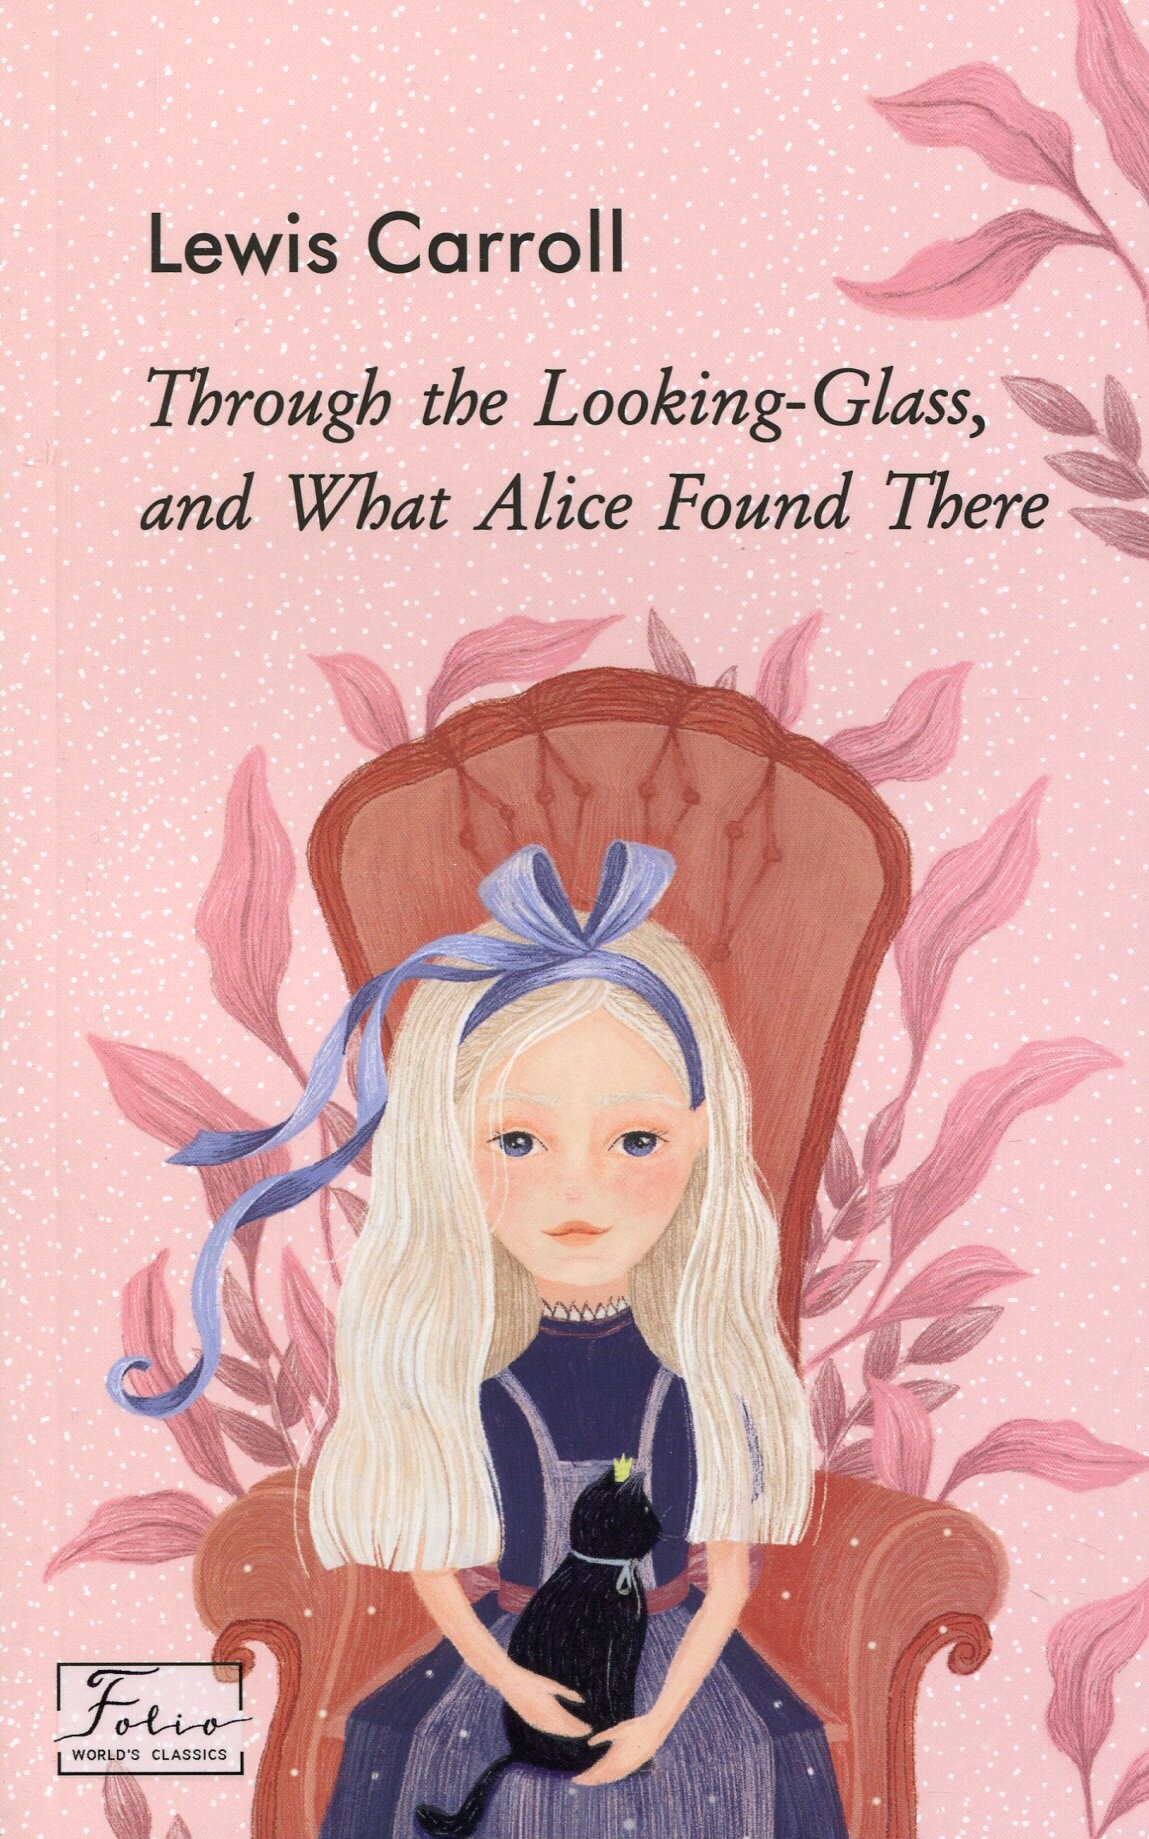 Through the Looking-Glass, and What Alice Found There - Vivat